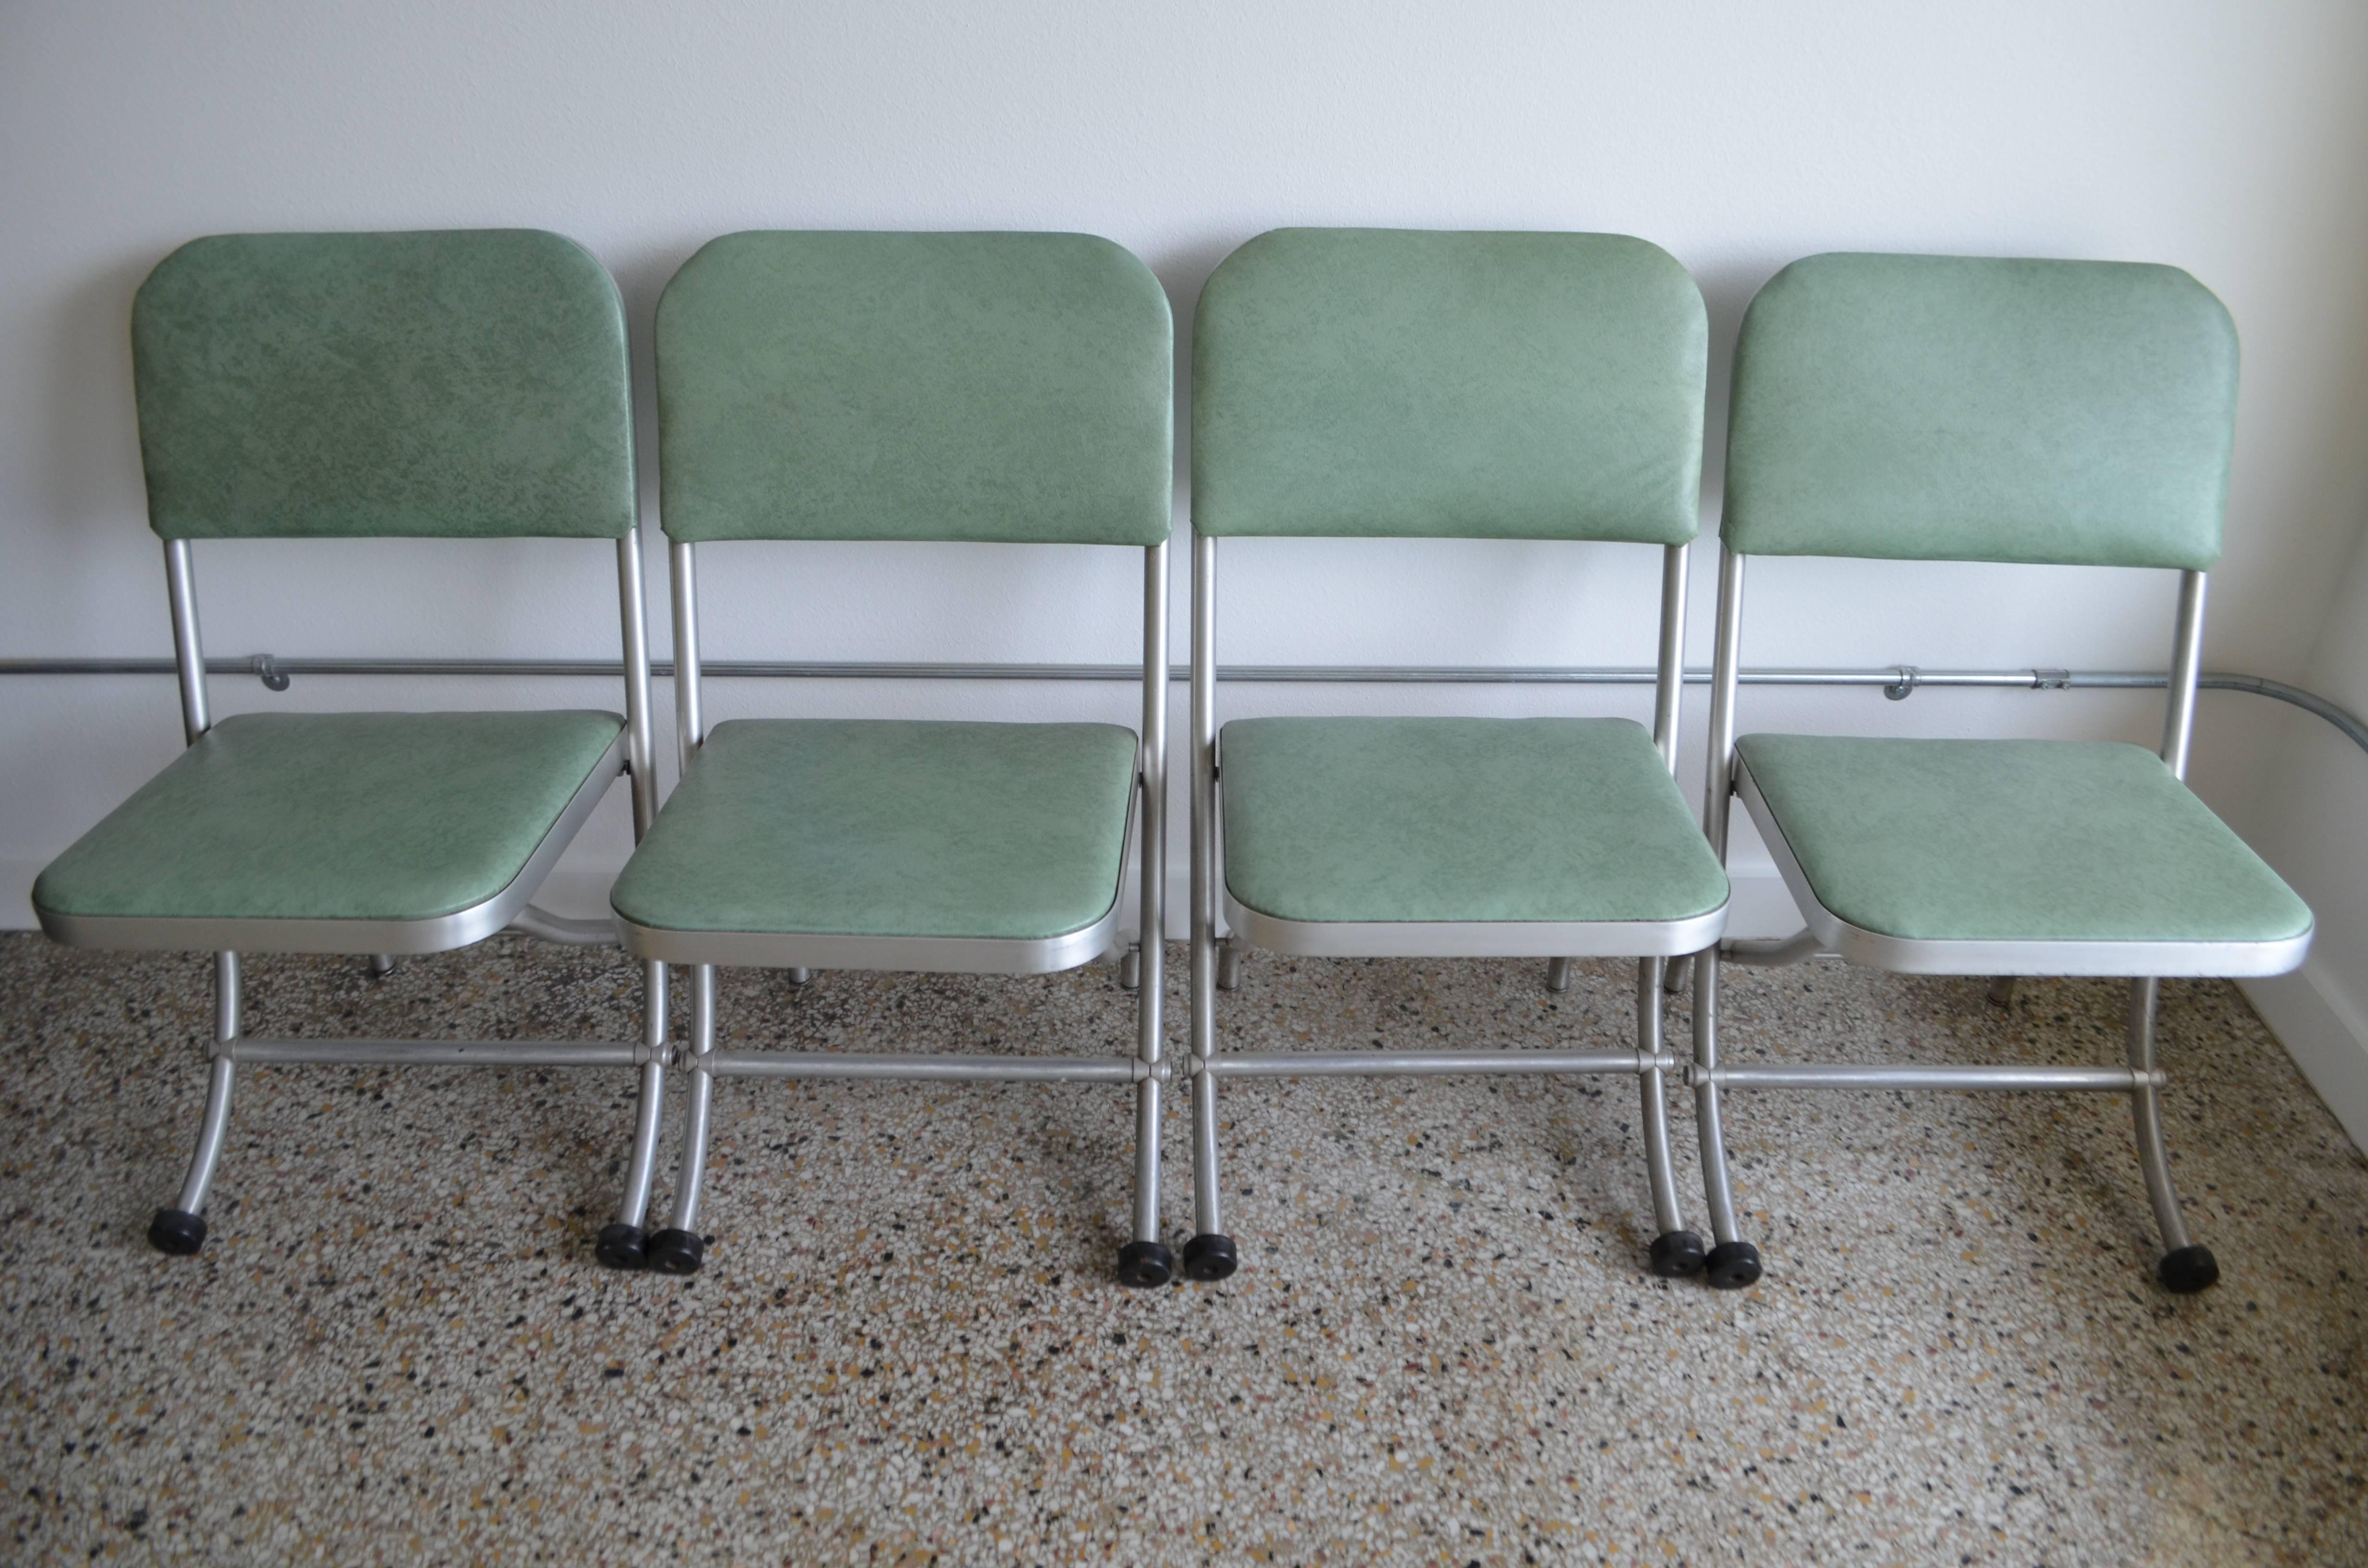 Mid-Century folding chairs (set of 3) of aluminum designed by Warren Macarthur with original mint green vinyl upholstery. Marked with labels underneath seat. Featherweight with extreme comfort and Classic MacArthur curved front legs. Mint condition.